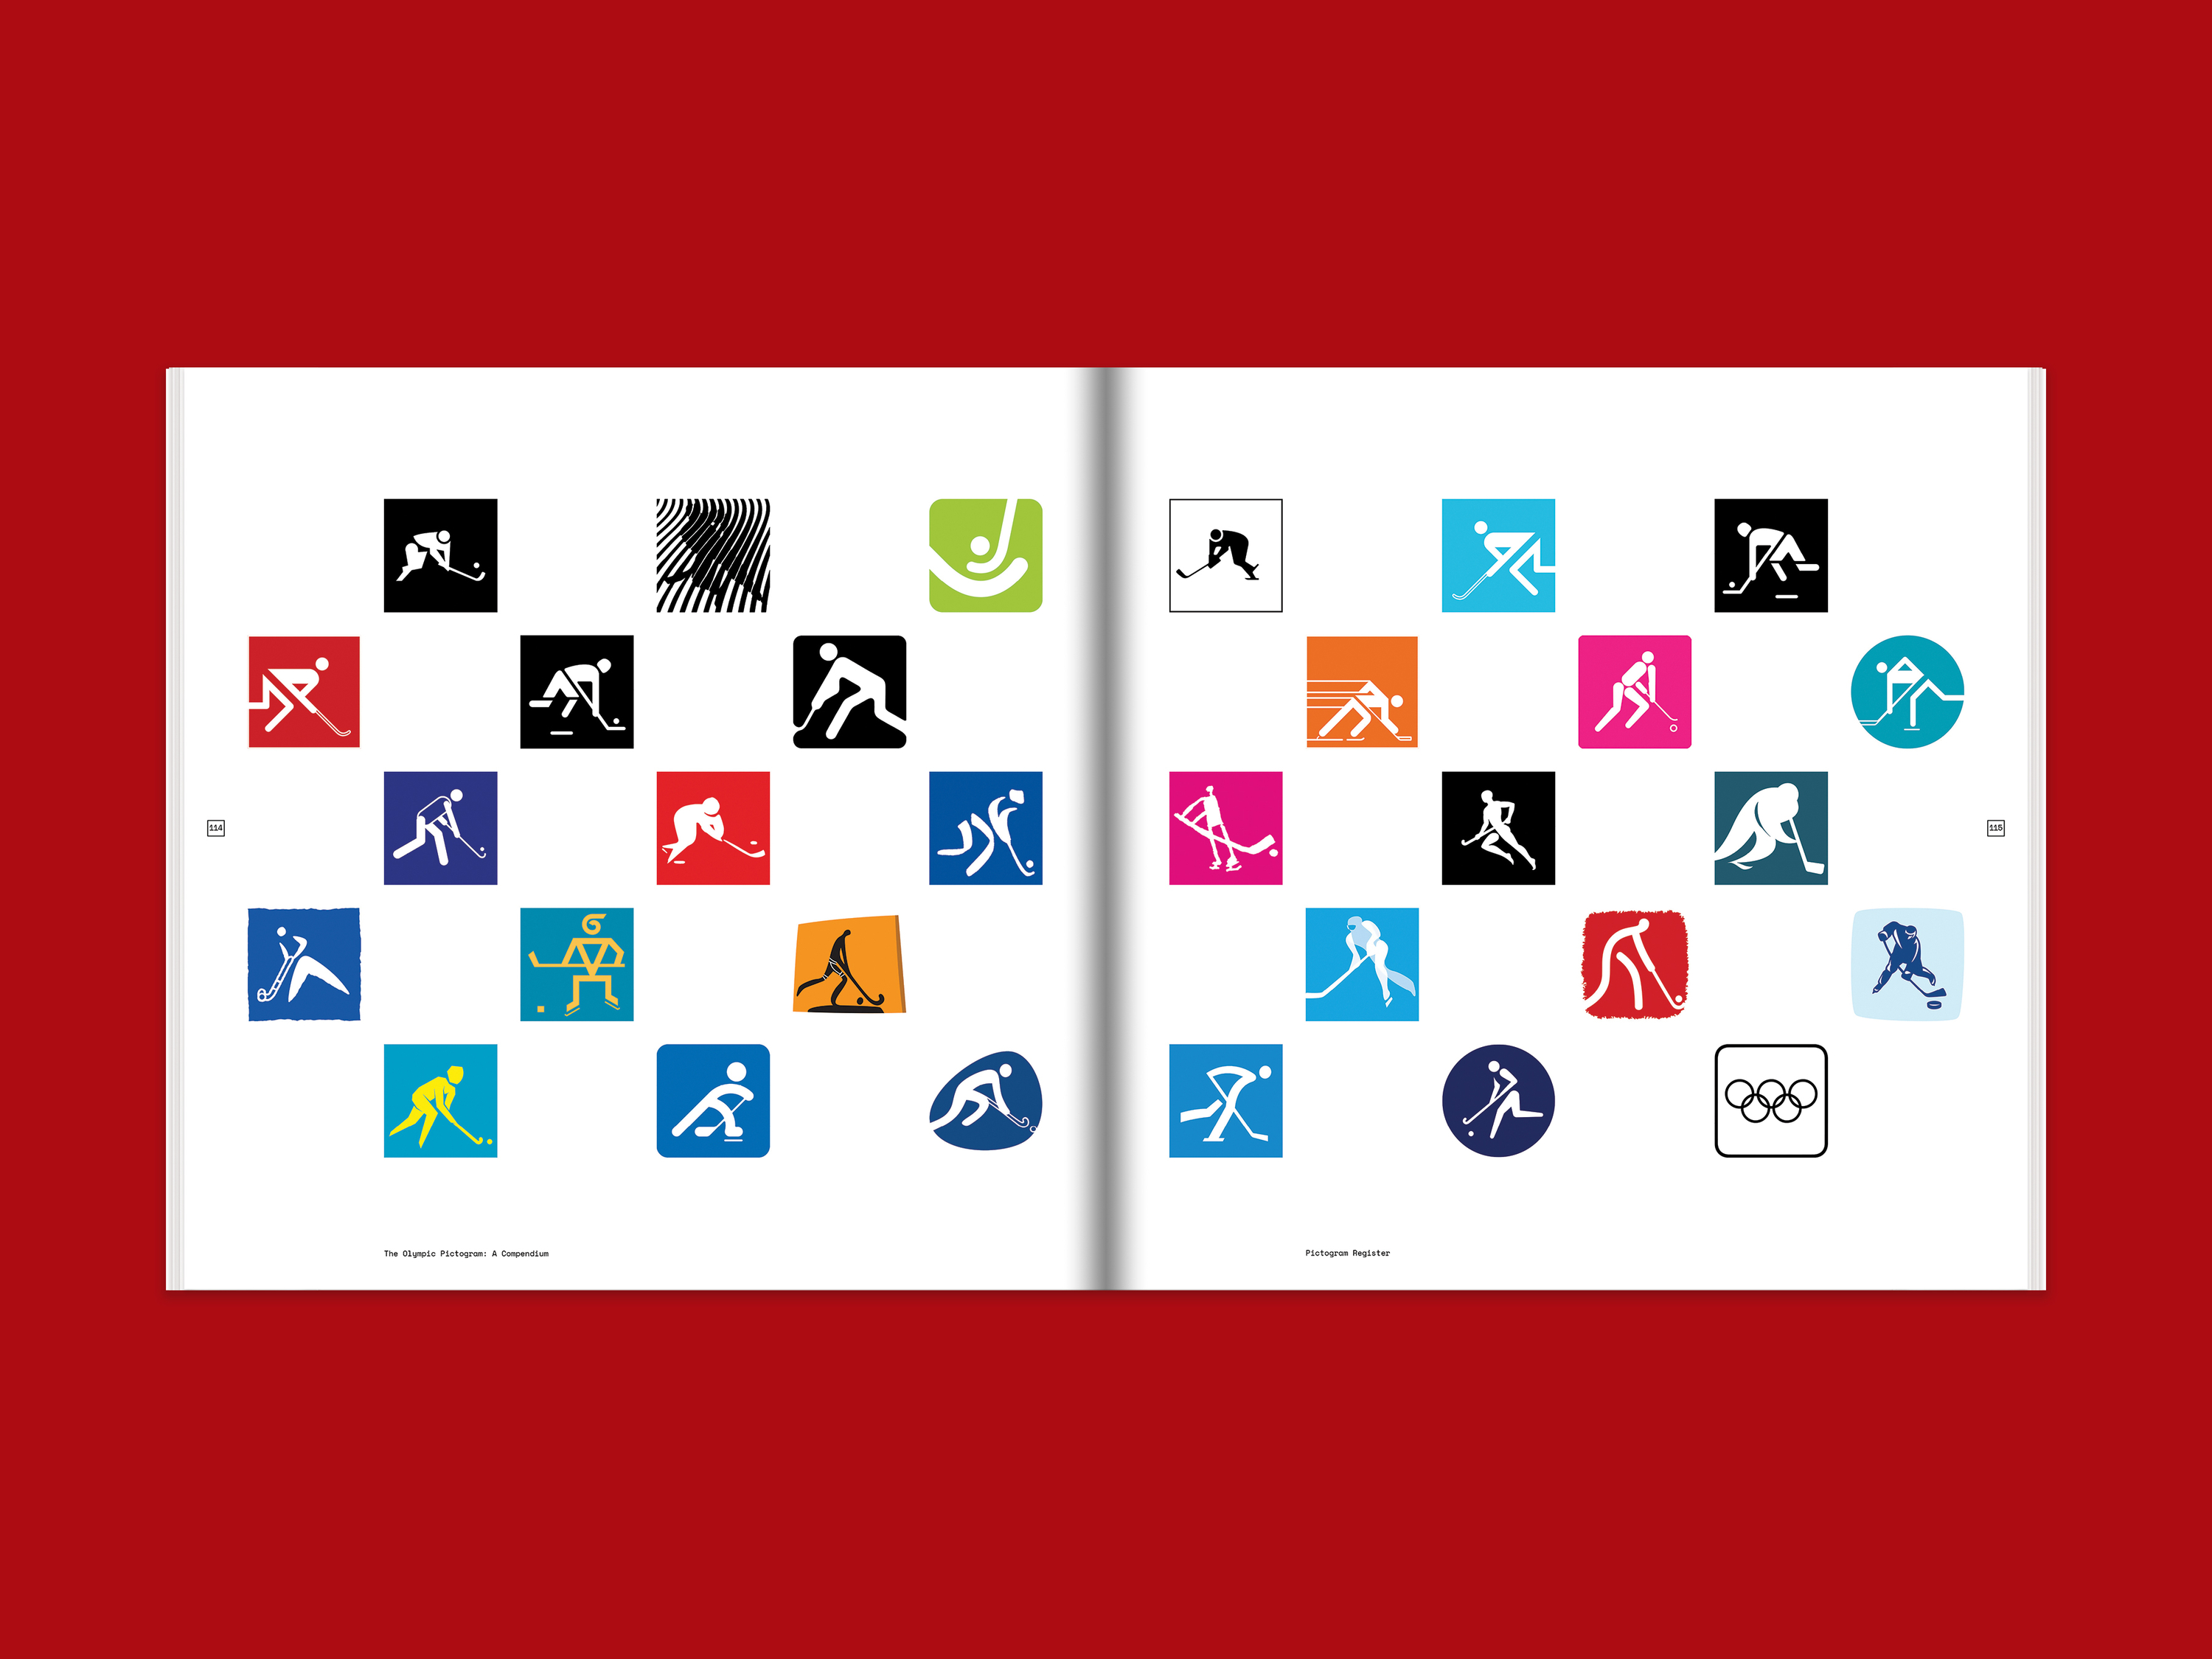 The Olympic Pictogram: A Compendium